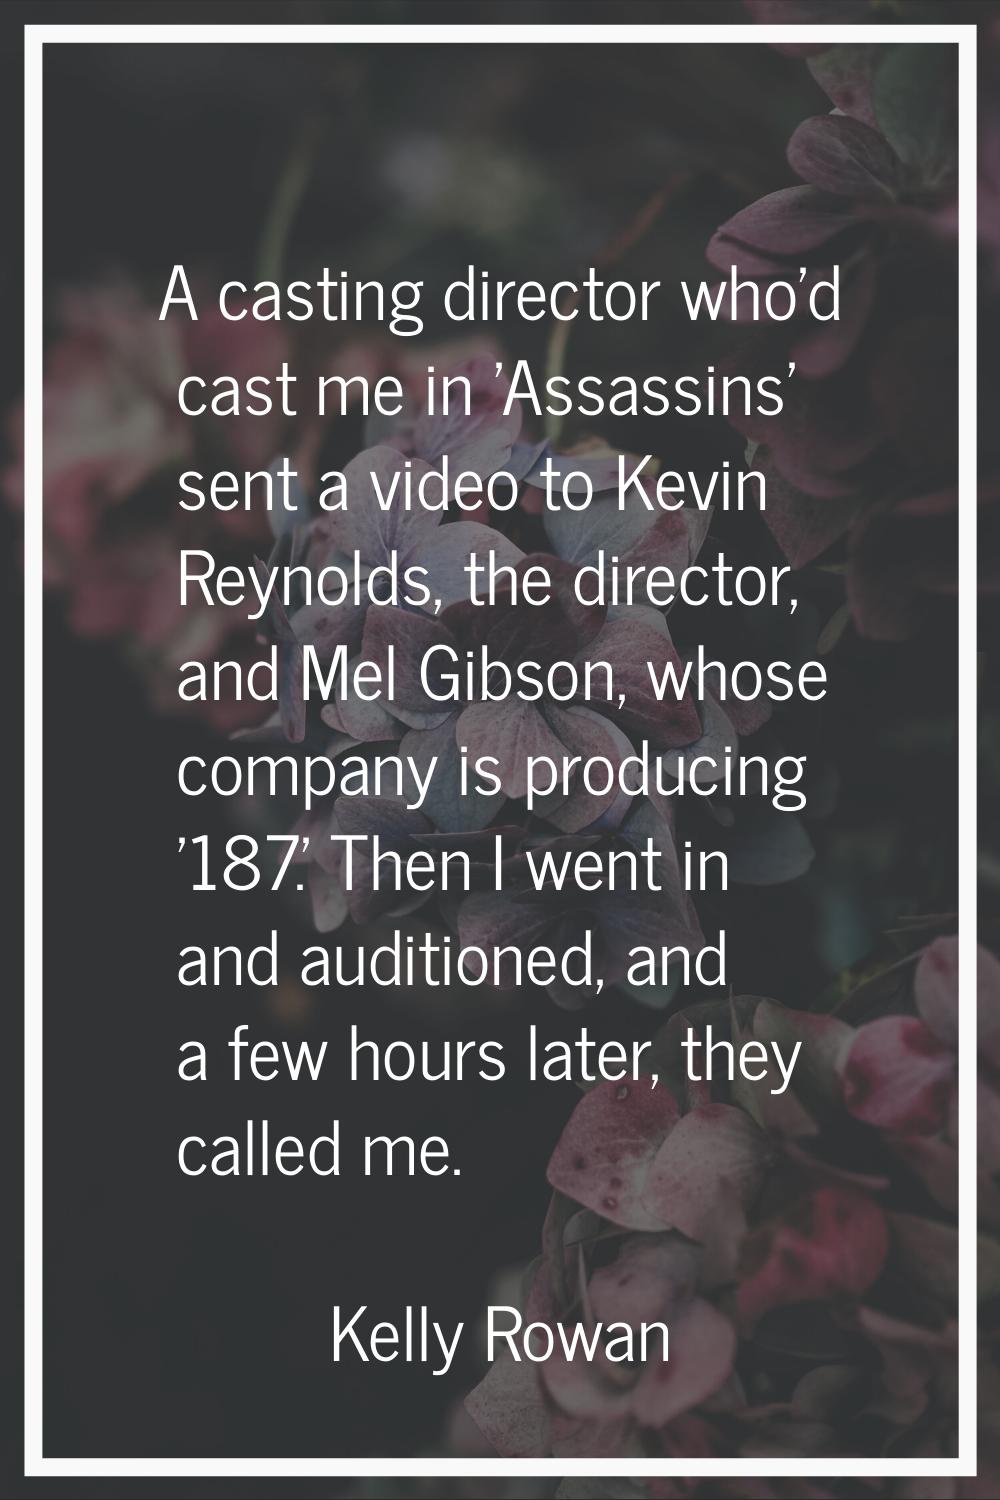 A casting director who'd cast me in 'Assassins' sent a video to Kevin Reynolds, the director, and M